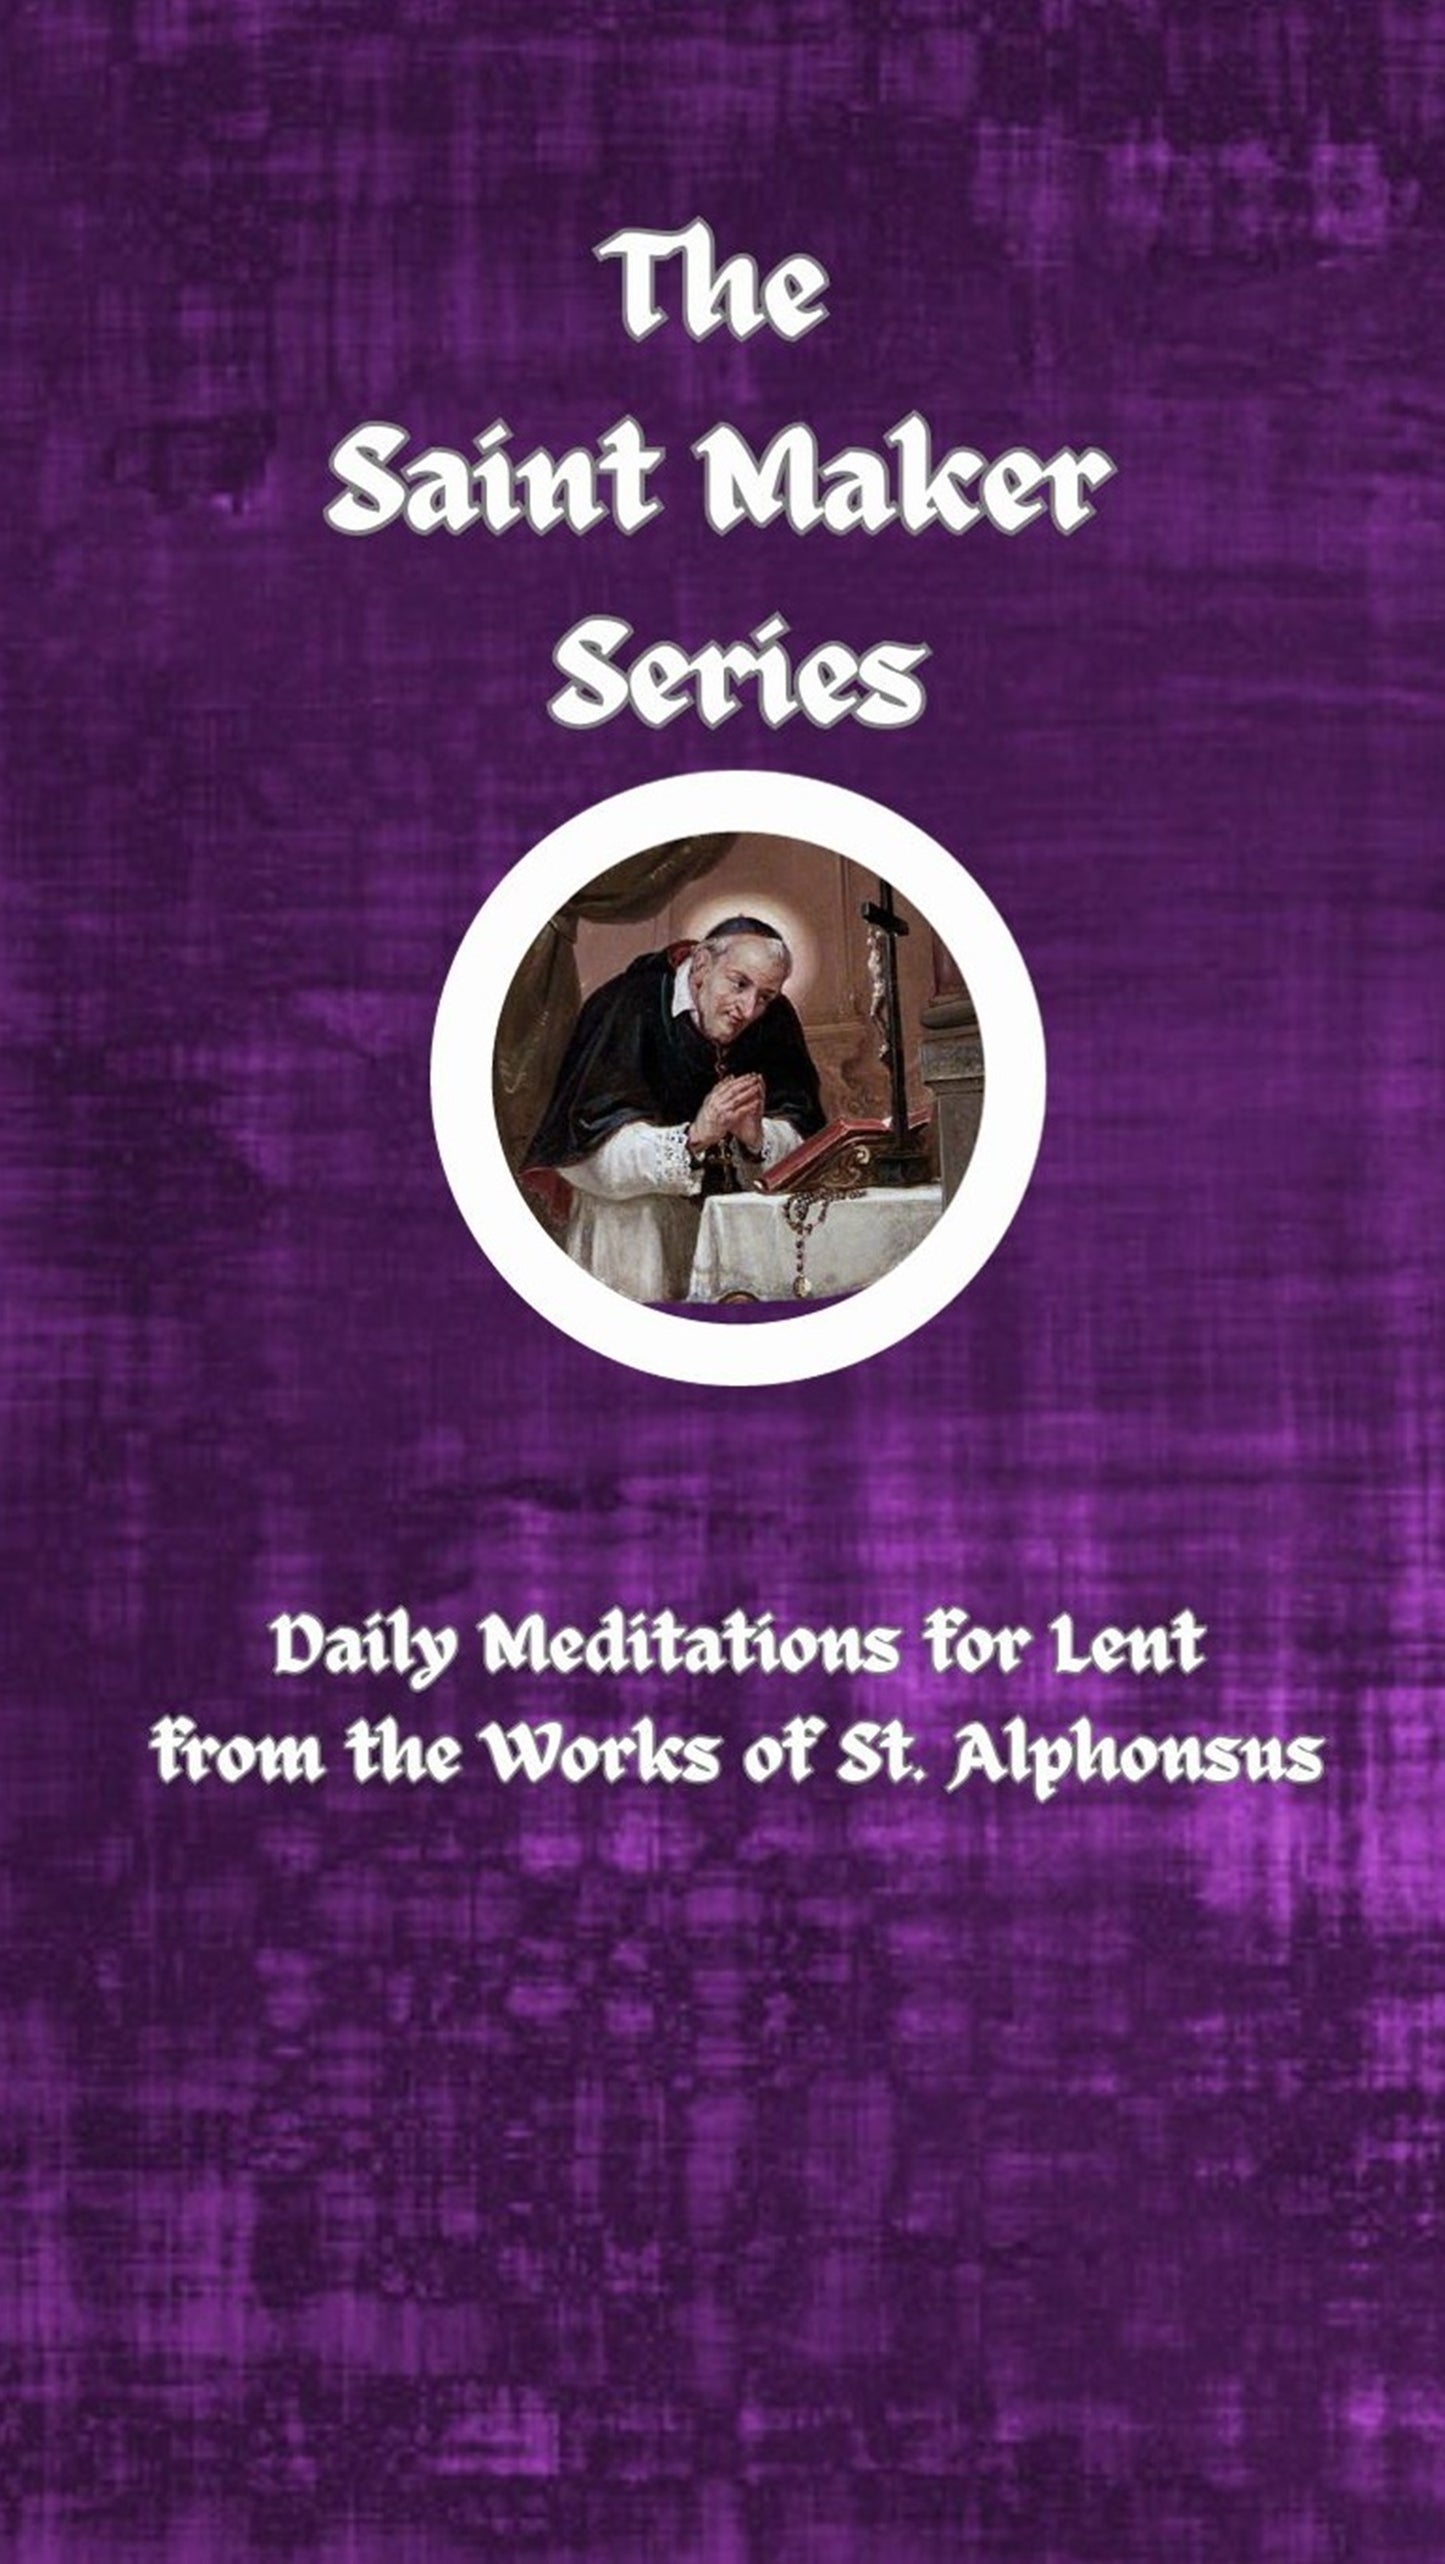 The Saint Maker Series: Daily Lent Meditations from the Works of St. Alphonsus